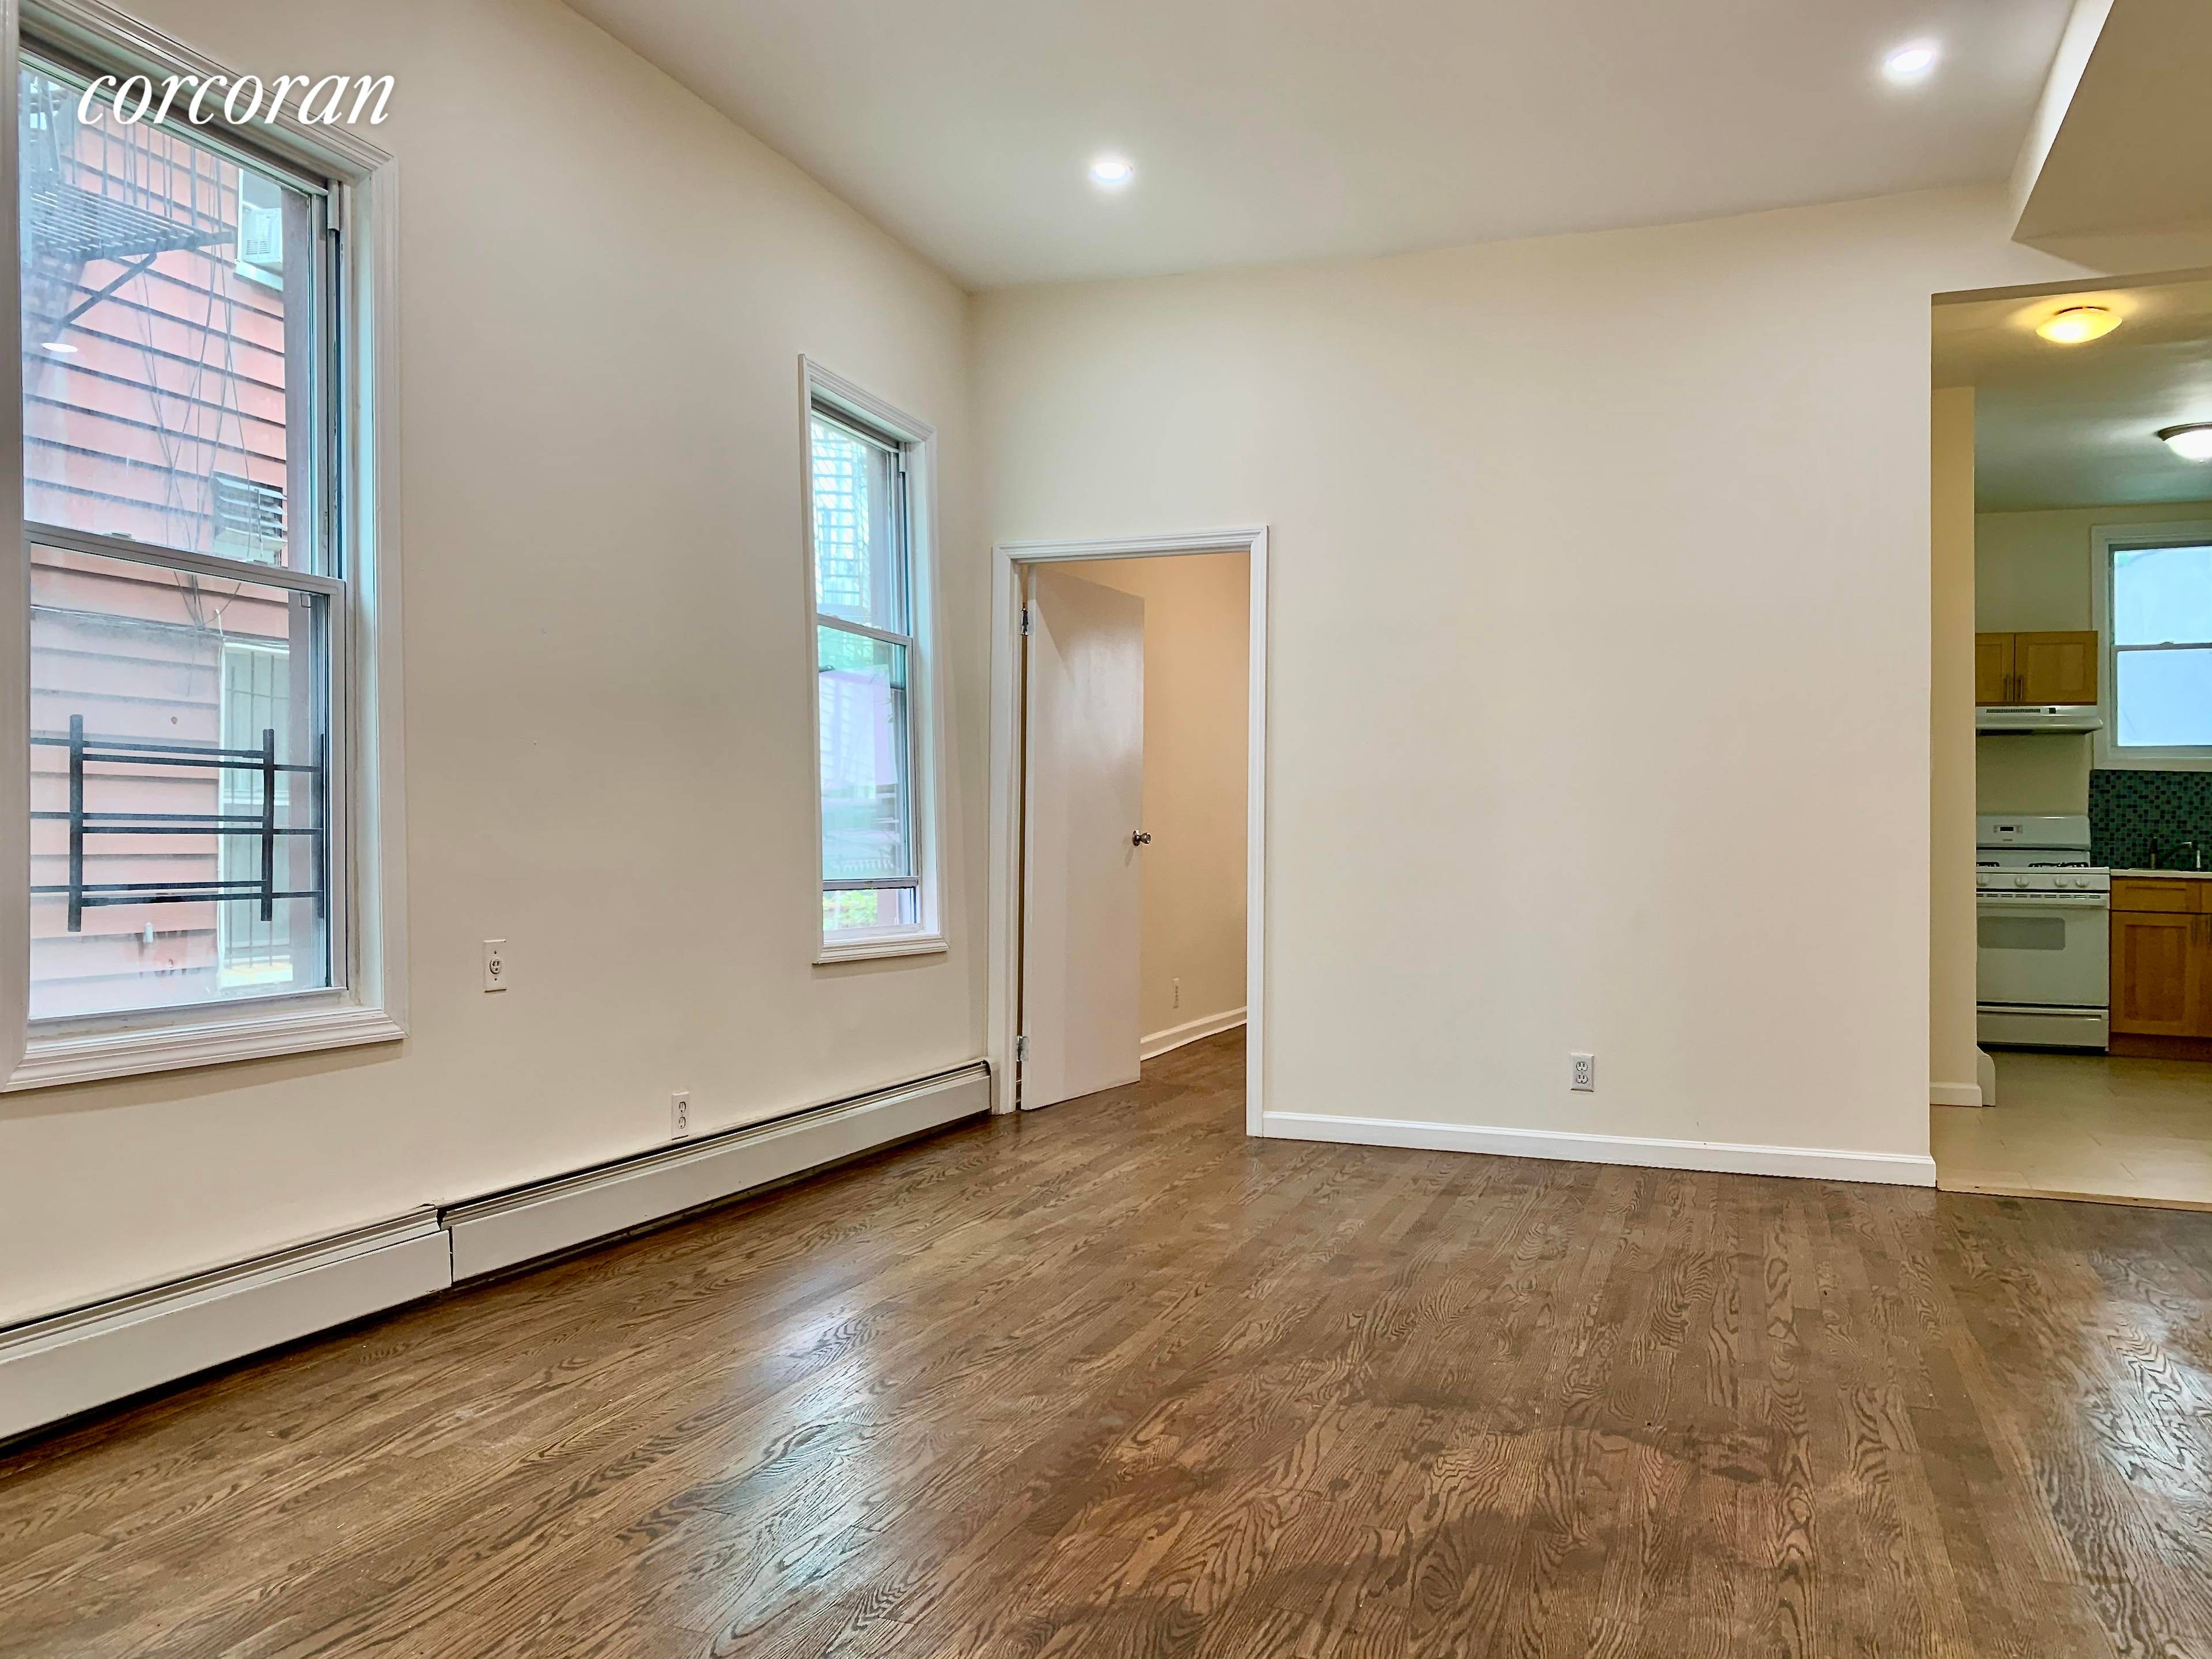 Walk to McCarren Park ! Come live in a newly renovated 2BD Corner Apartment located on Engert and Graham Ave in Greenpoint, this location is unmatched.